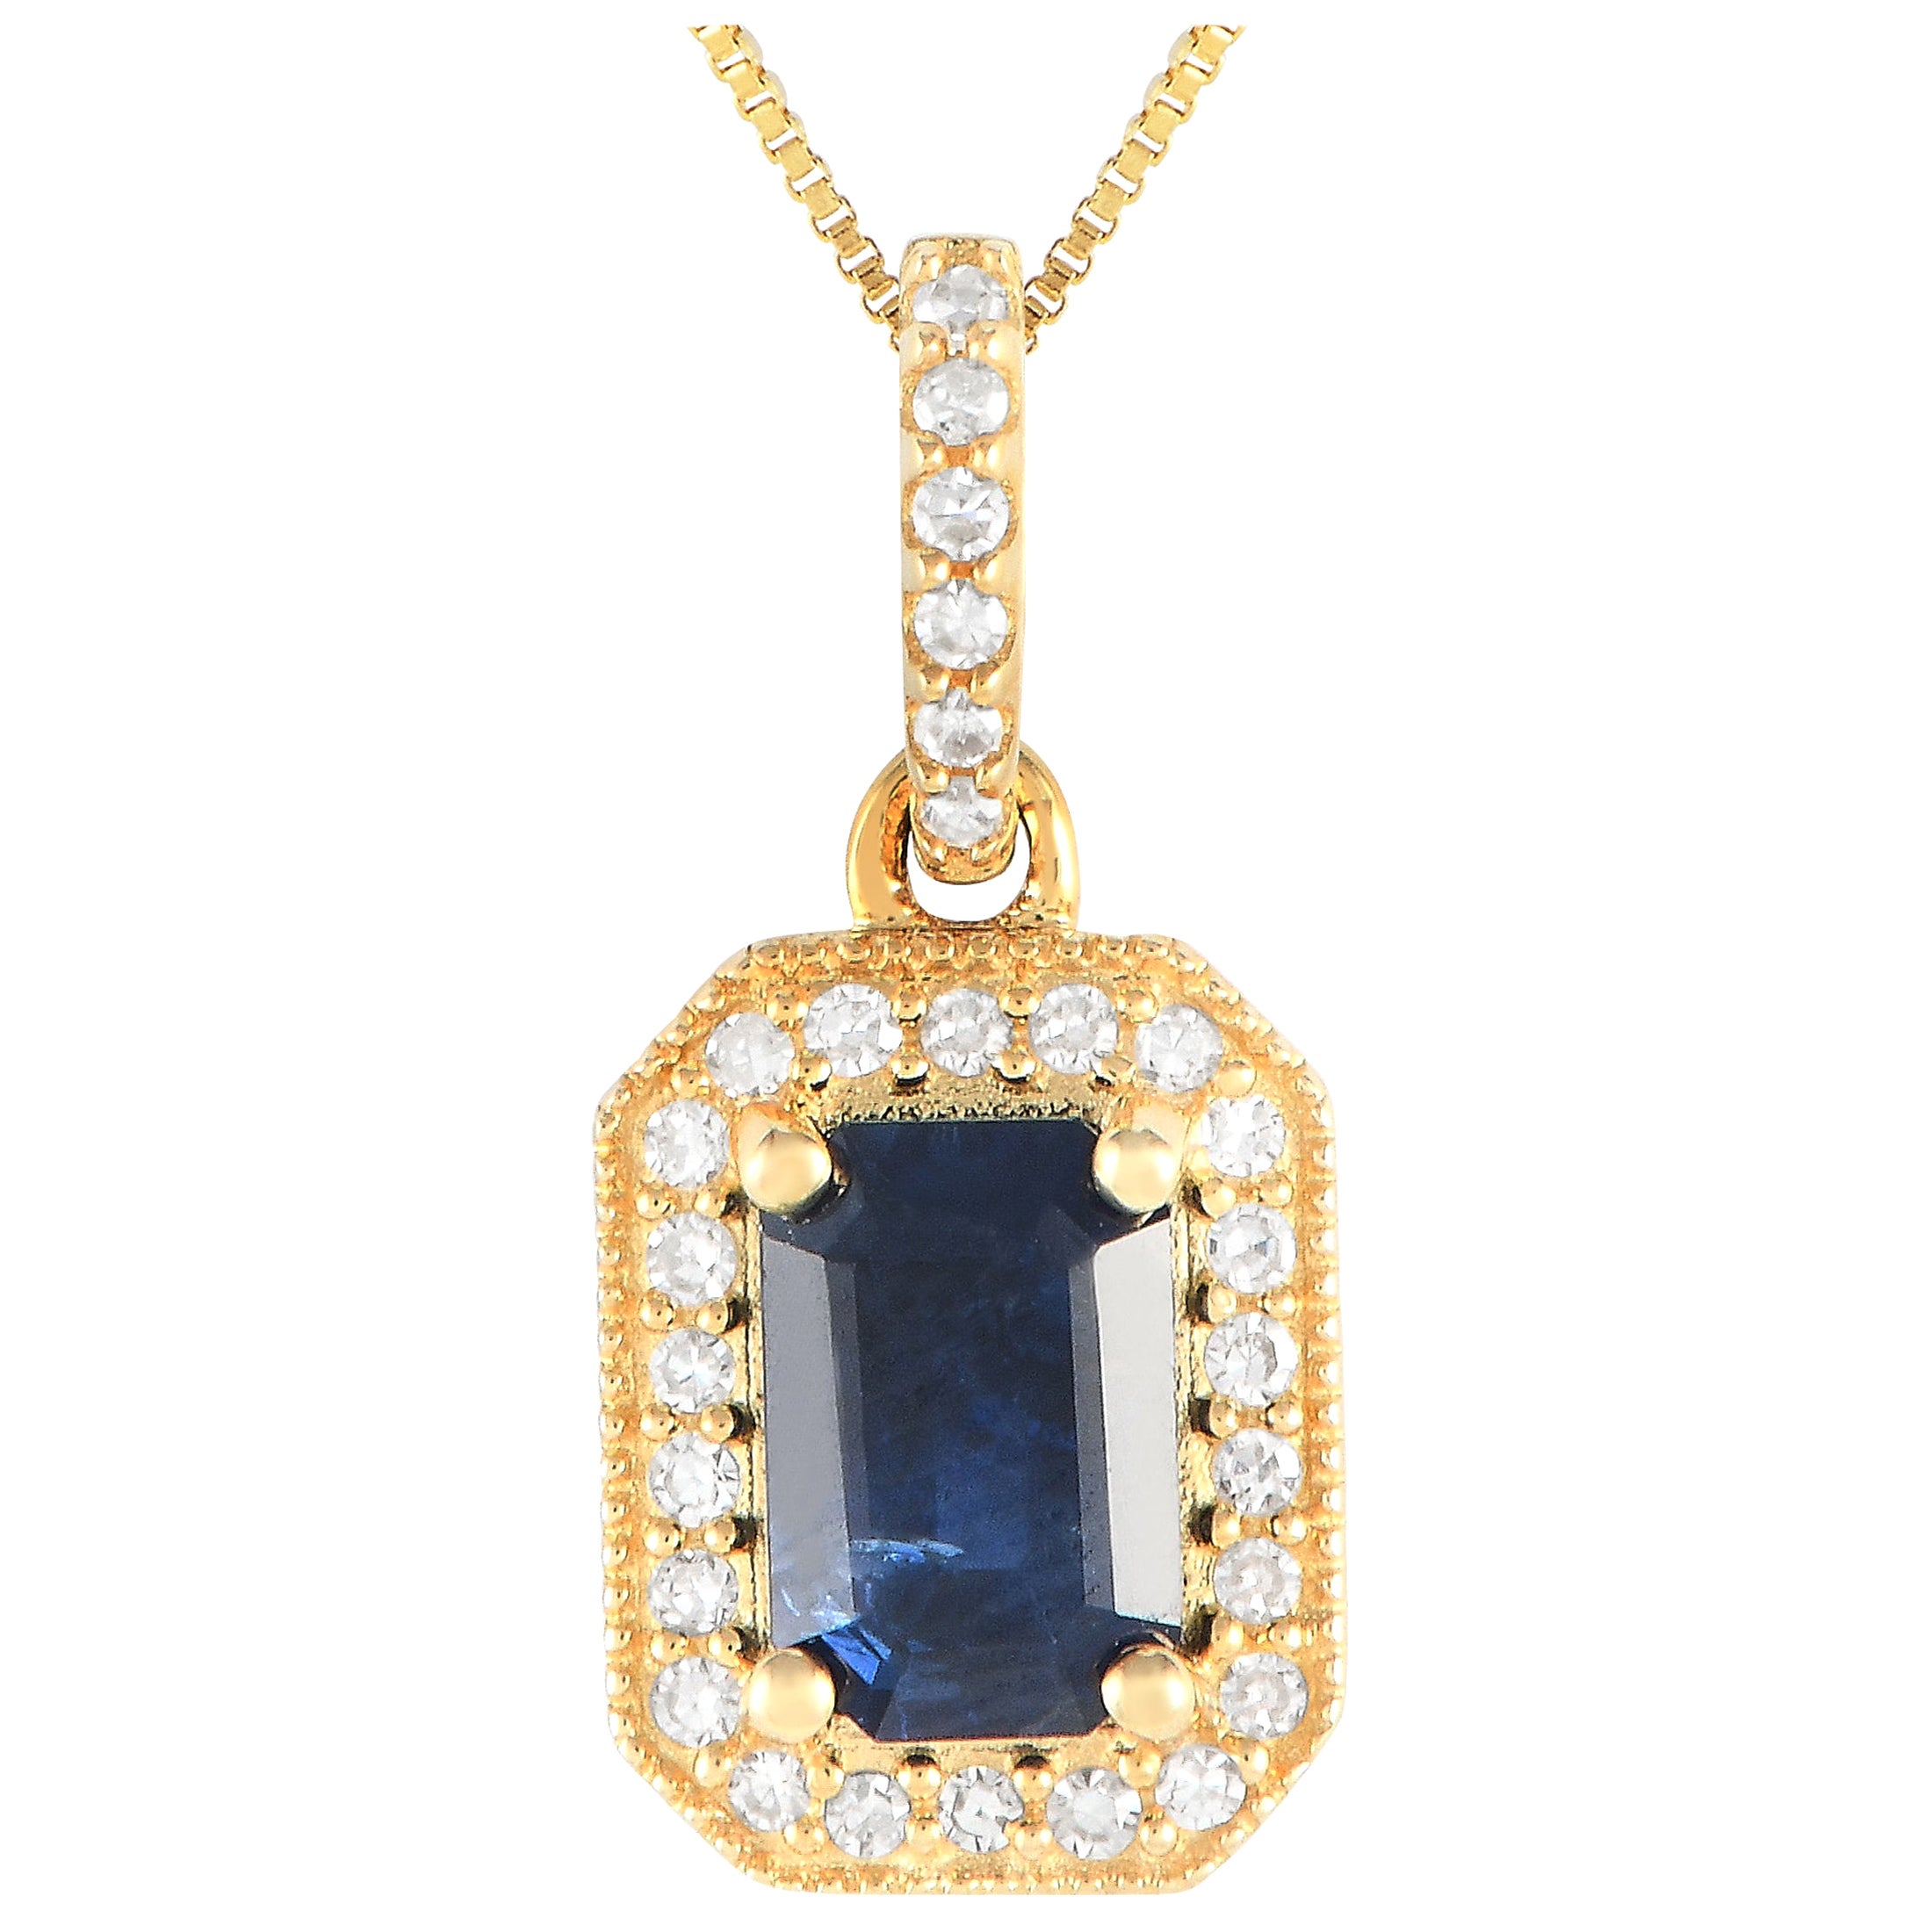 LB Exclusive 14K Yellow Gold 0.10ct Diamond Pendant Necklace PD4-16050YSA For Sale